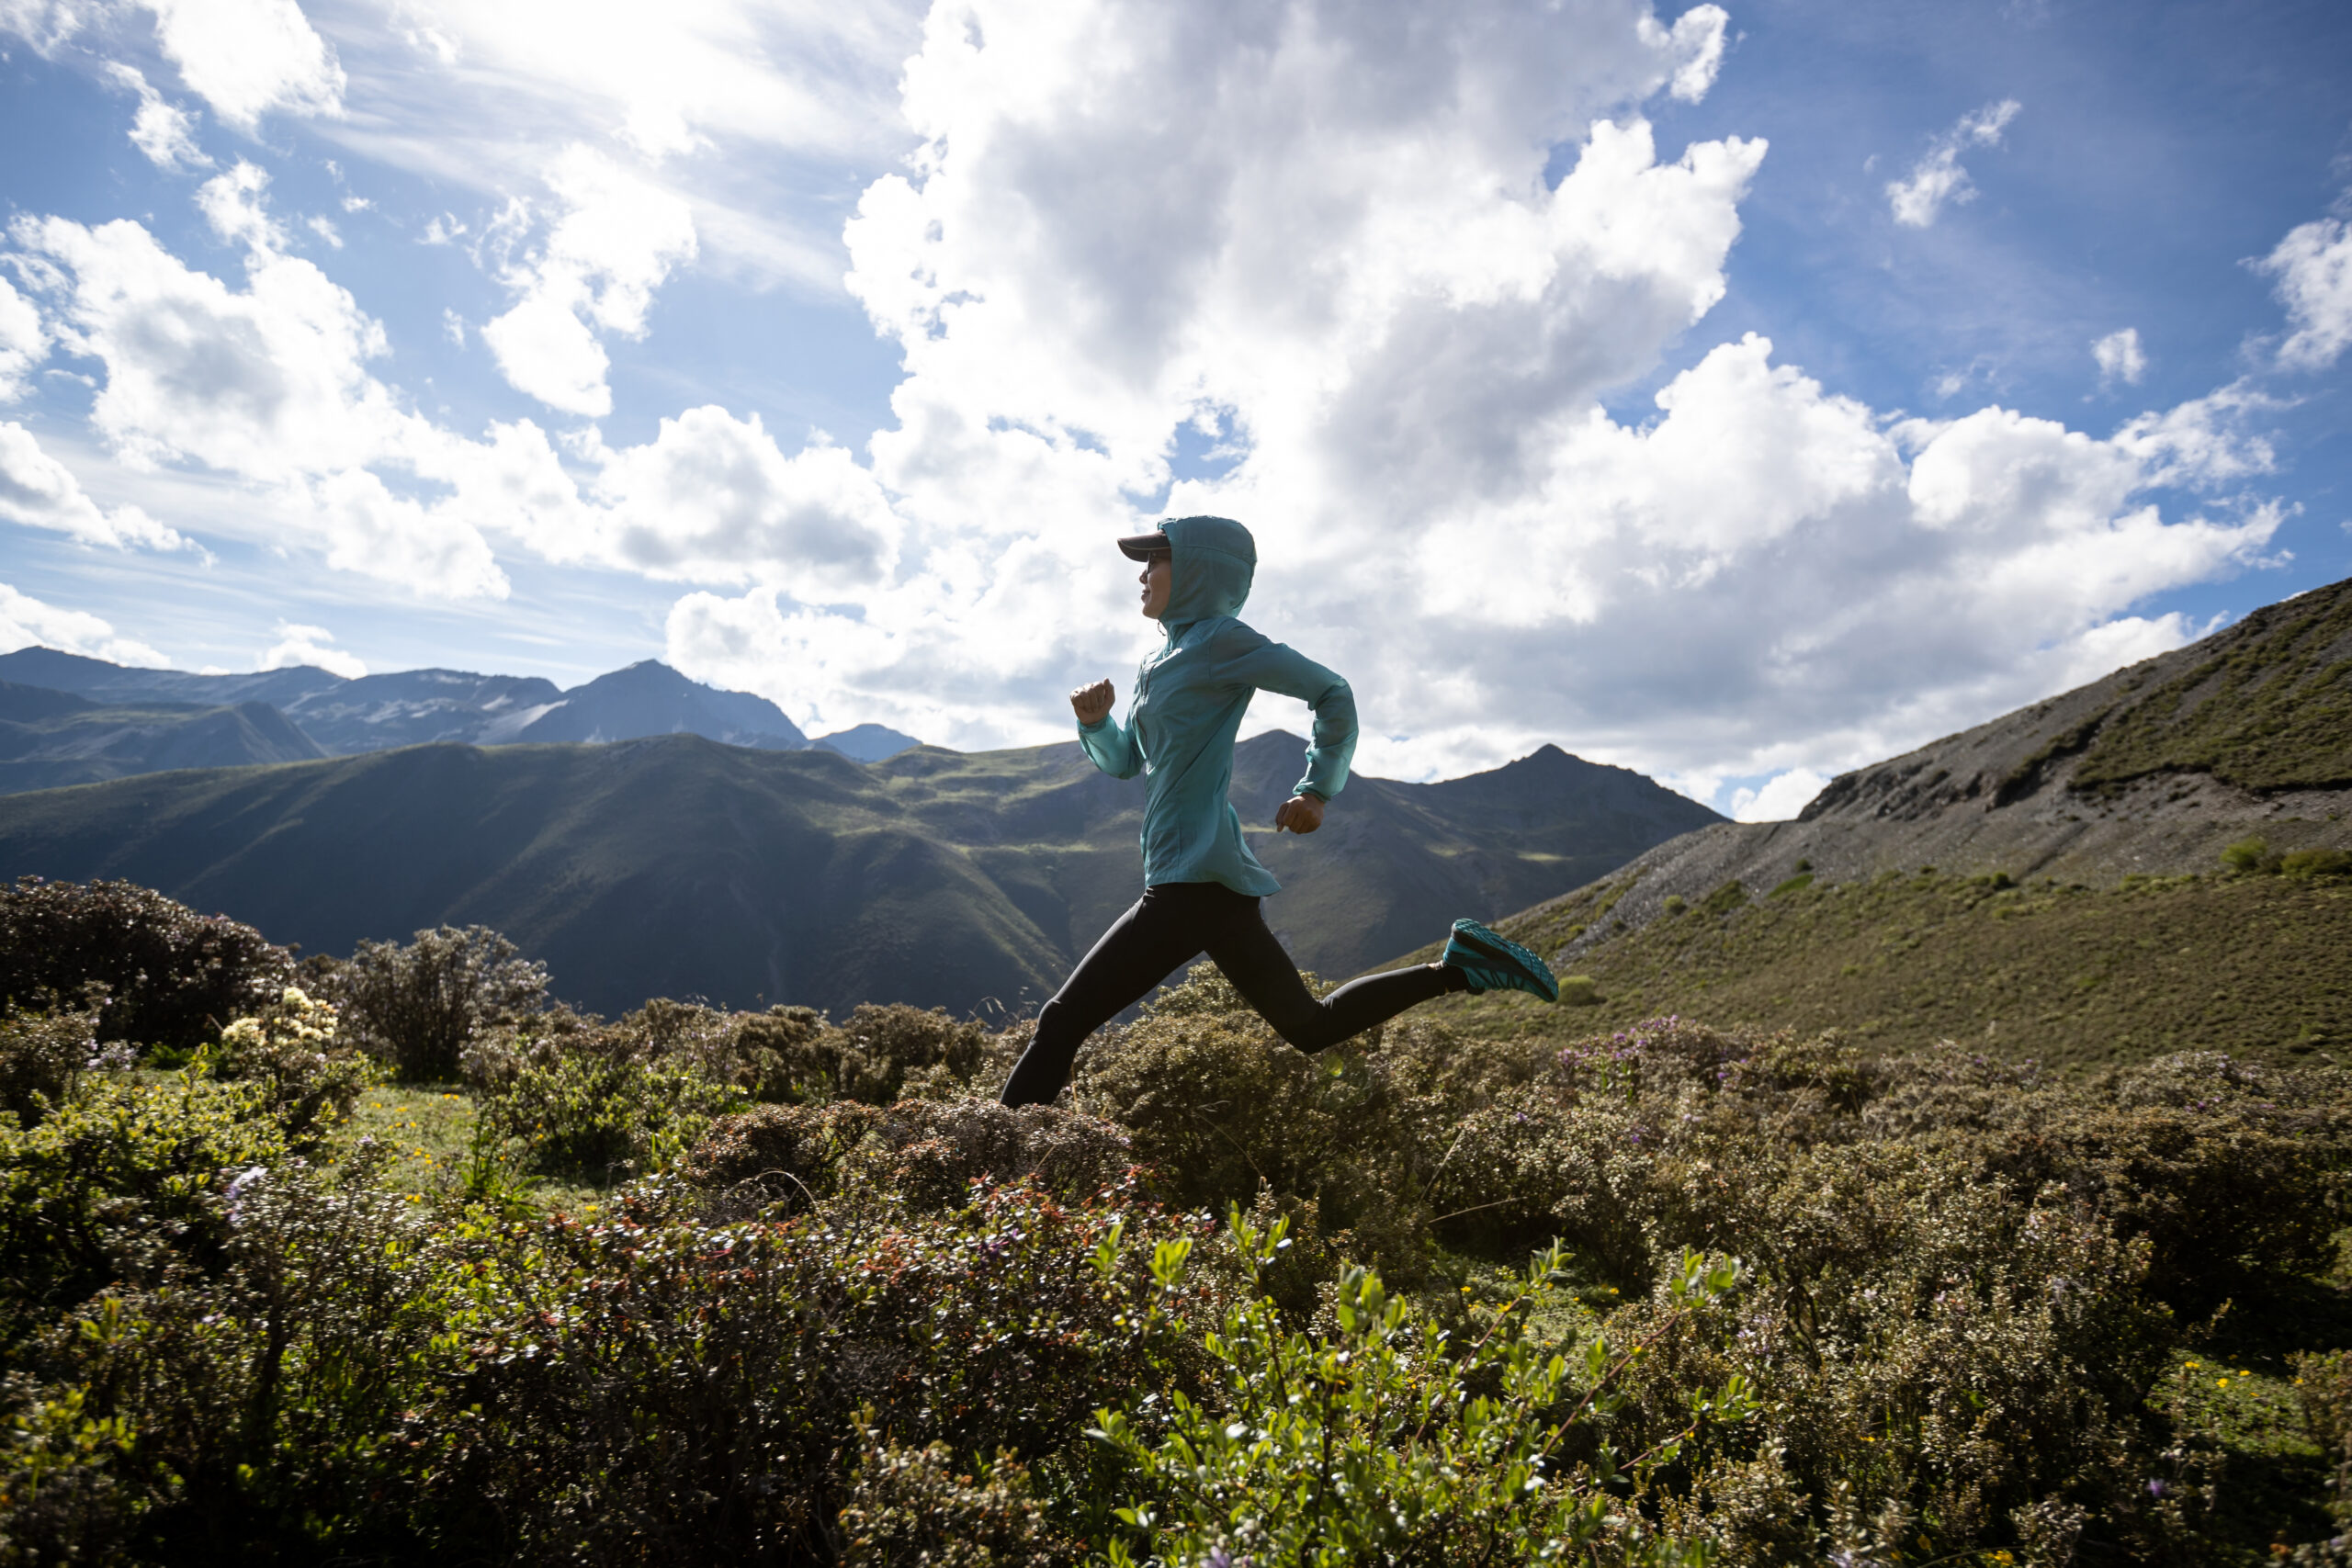 Your trusted beginners guide to trail running